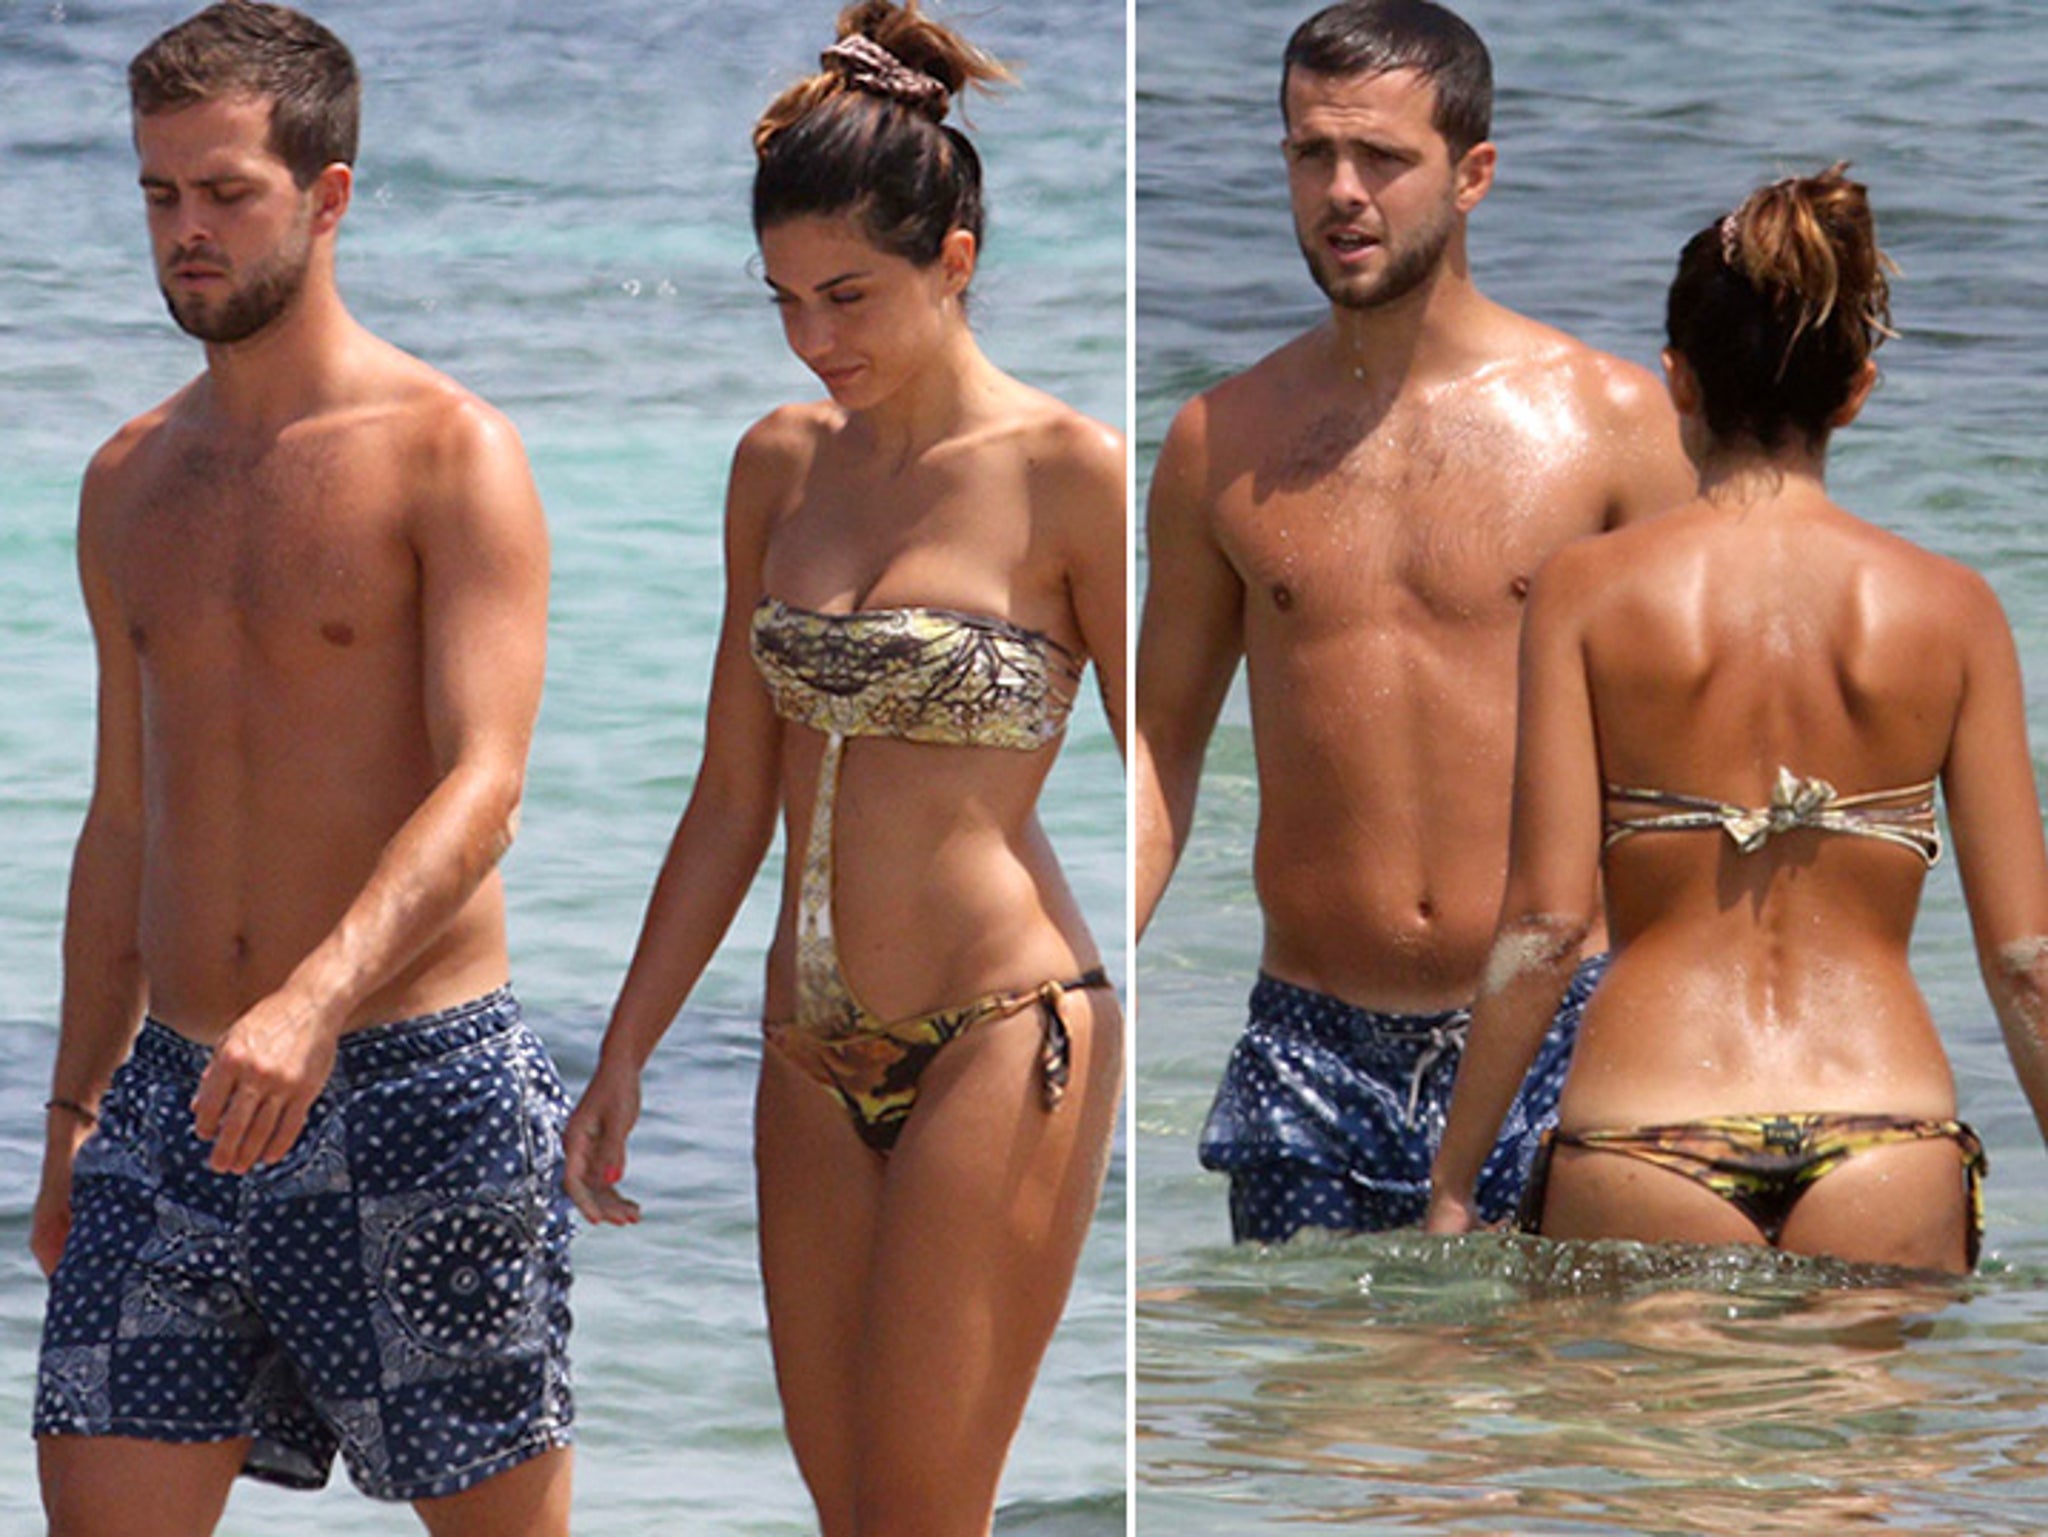 Soccer Superstar Miralem Pjanics Hot Wife Thongs Out In Ibiza pic